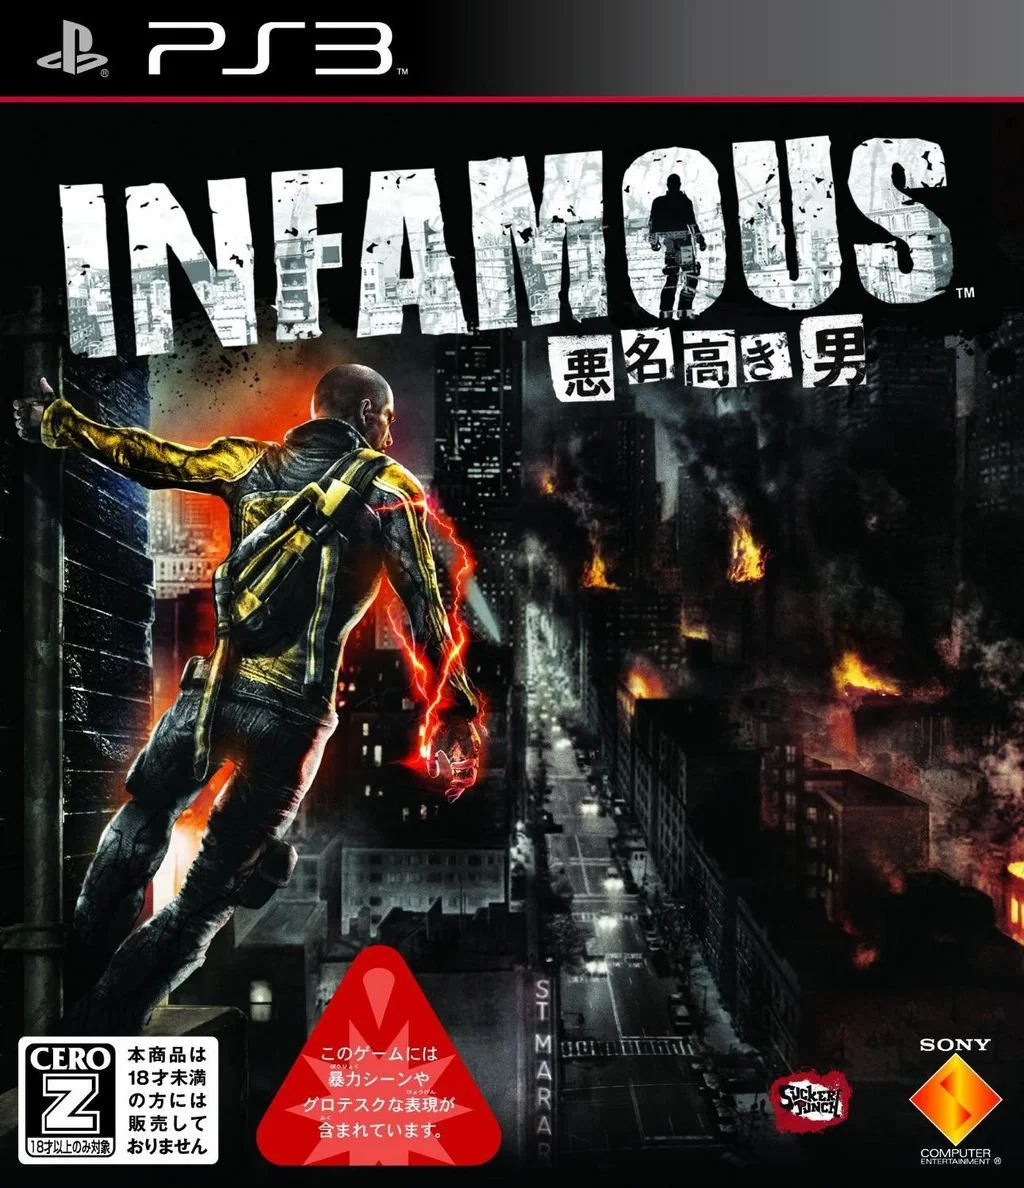 Infamous (video game) - Wikipedia